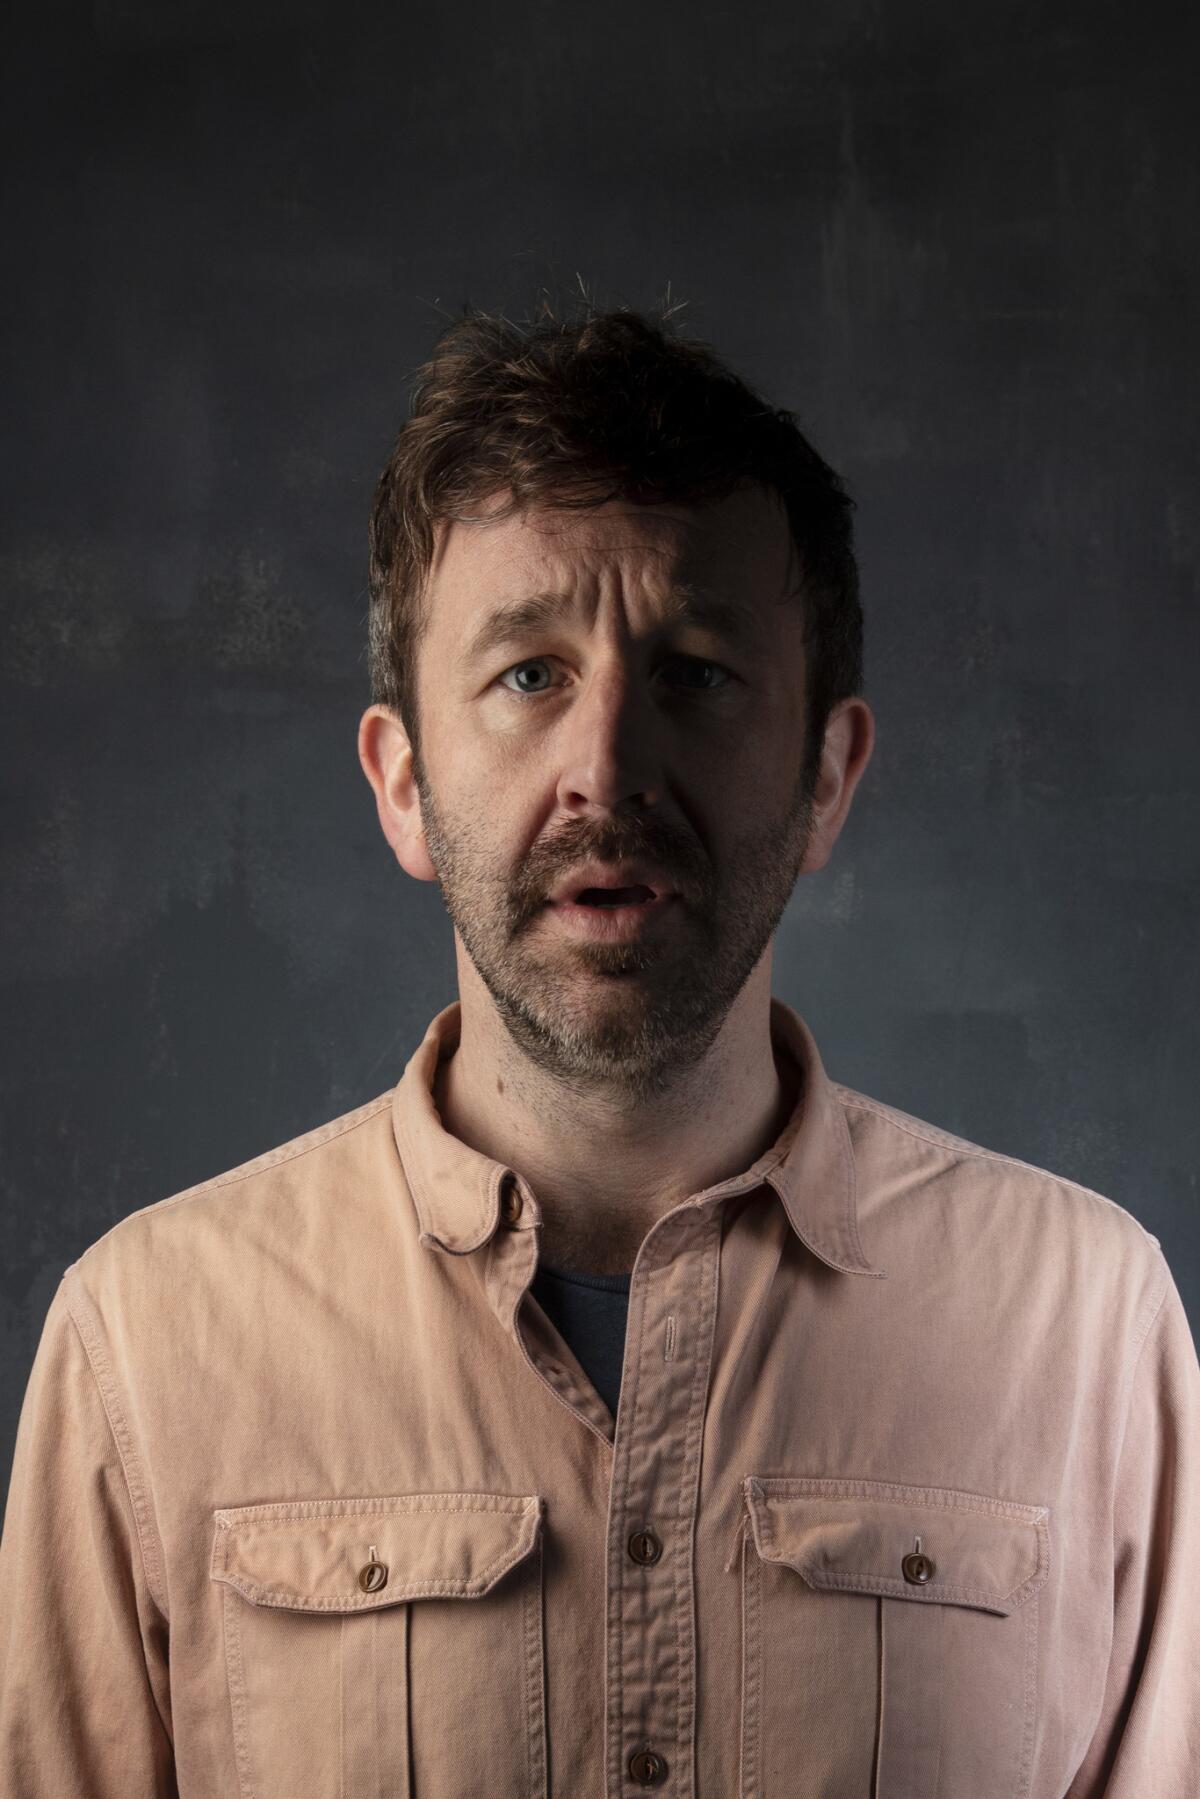 Chris O'Dowd, from the television series "State of the Union."